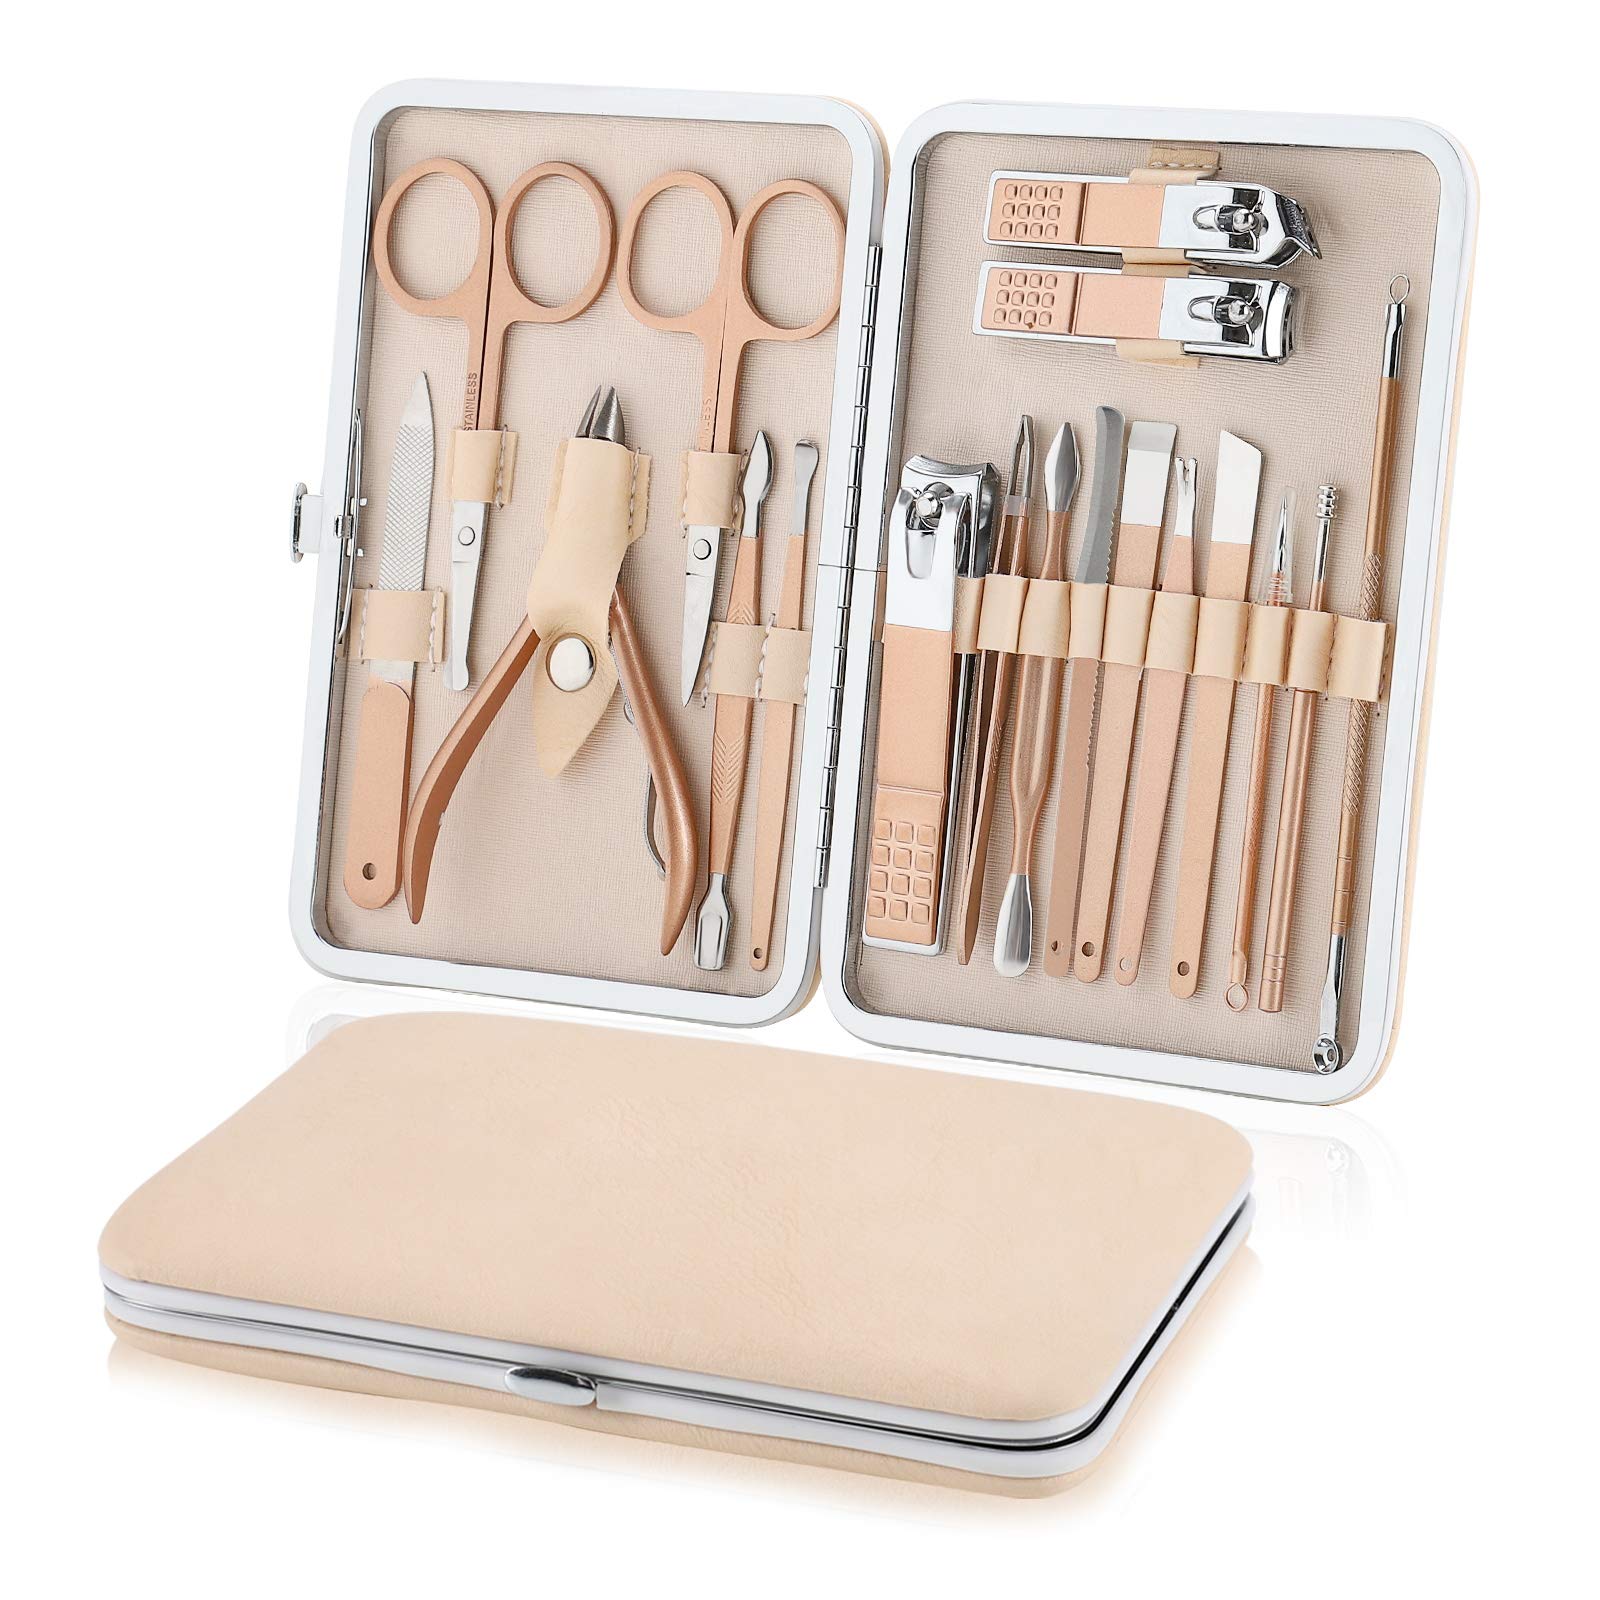 VENEKETY Manicure Pedicure Set Nail Clippers,7 pcs Nail Care Kit Personal  care Professional Travel Grooming Kit Tools Gift luxury pocket manicure set  For Women Men Friends Parents Manicure : Amazon.in: Beauty